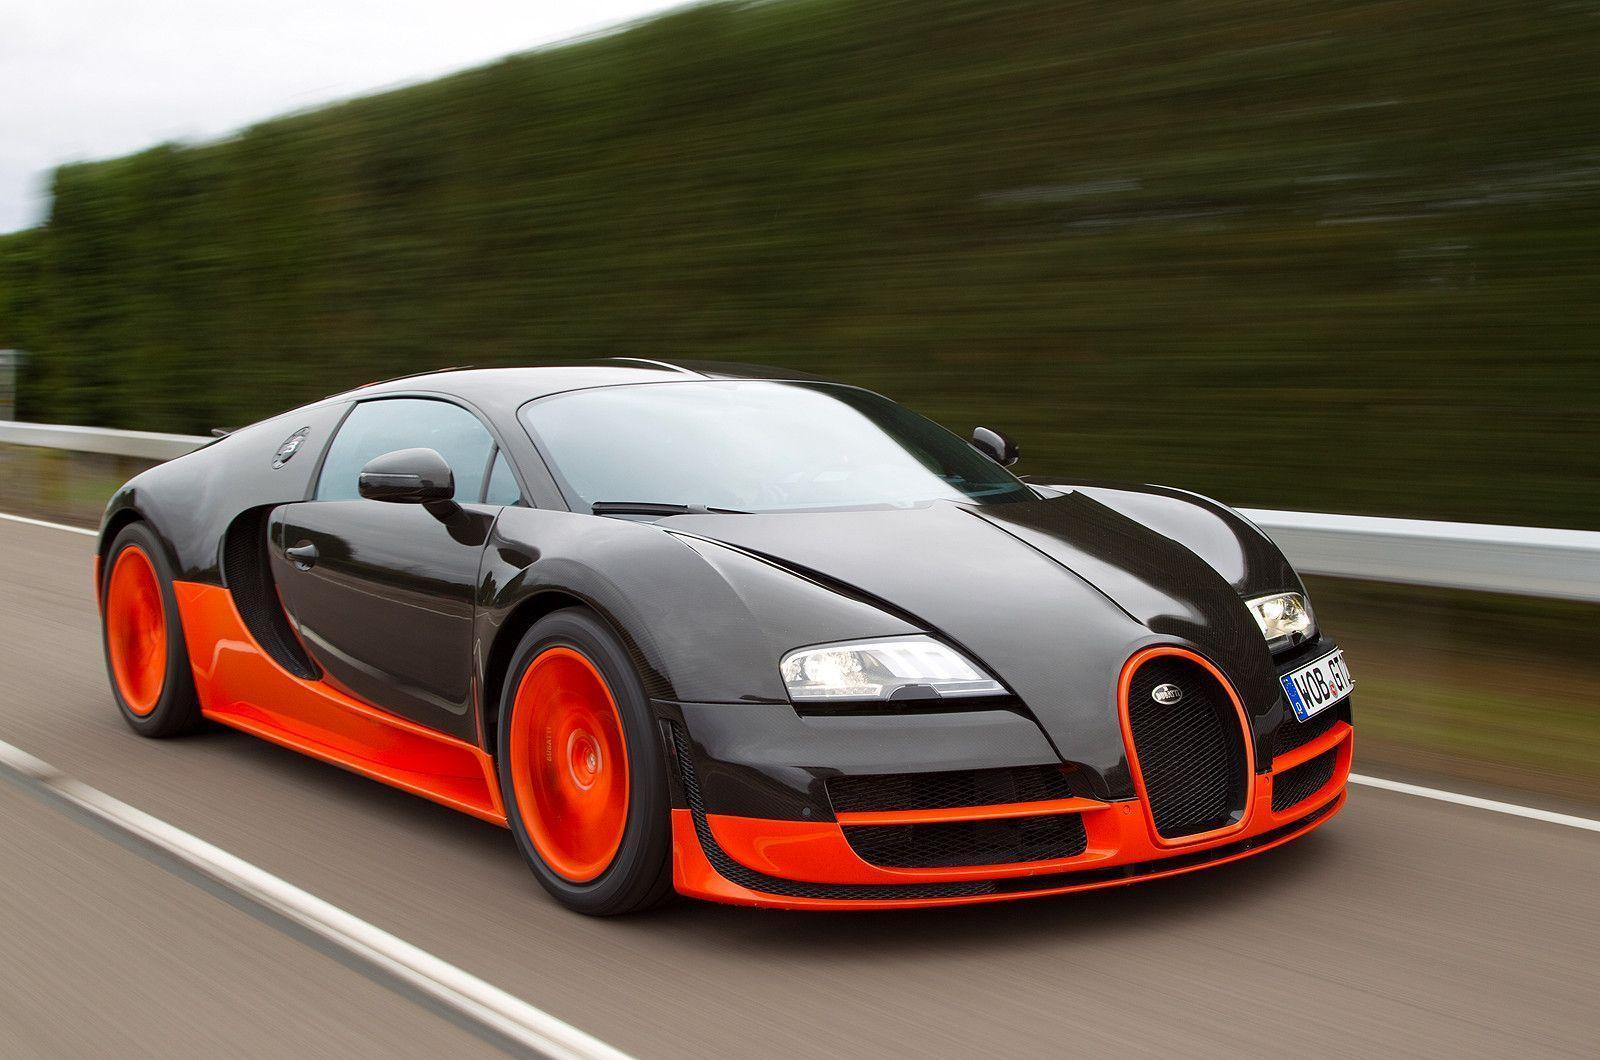 Which Are The Fastest Cars In The World? Here Is The